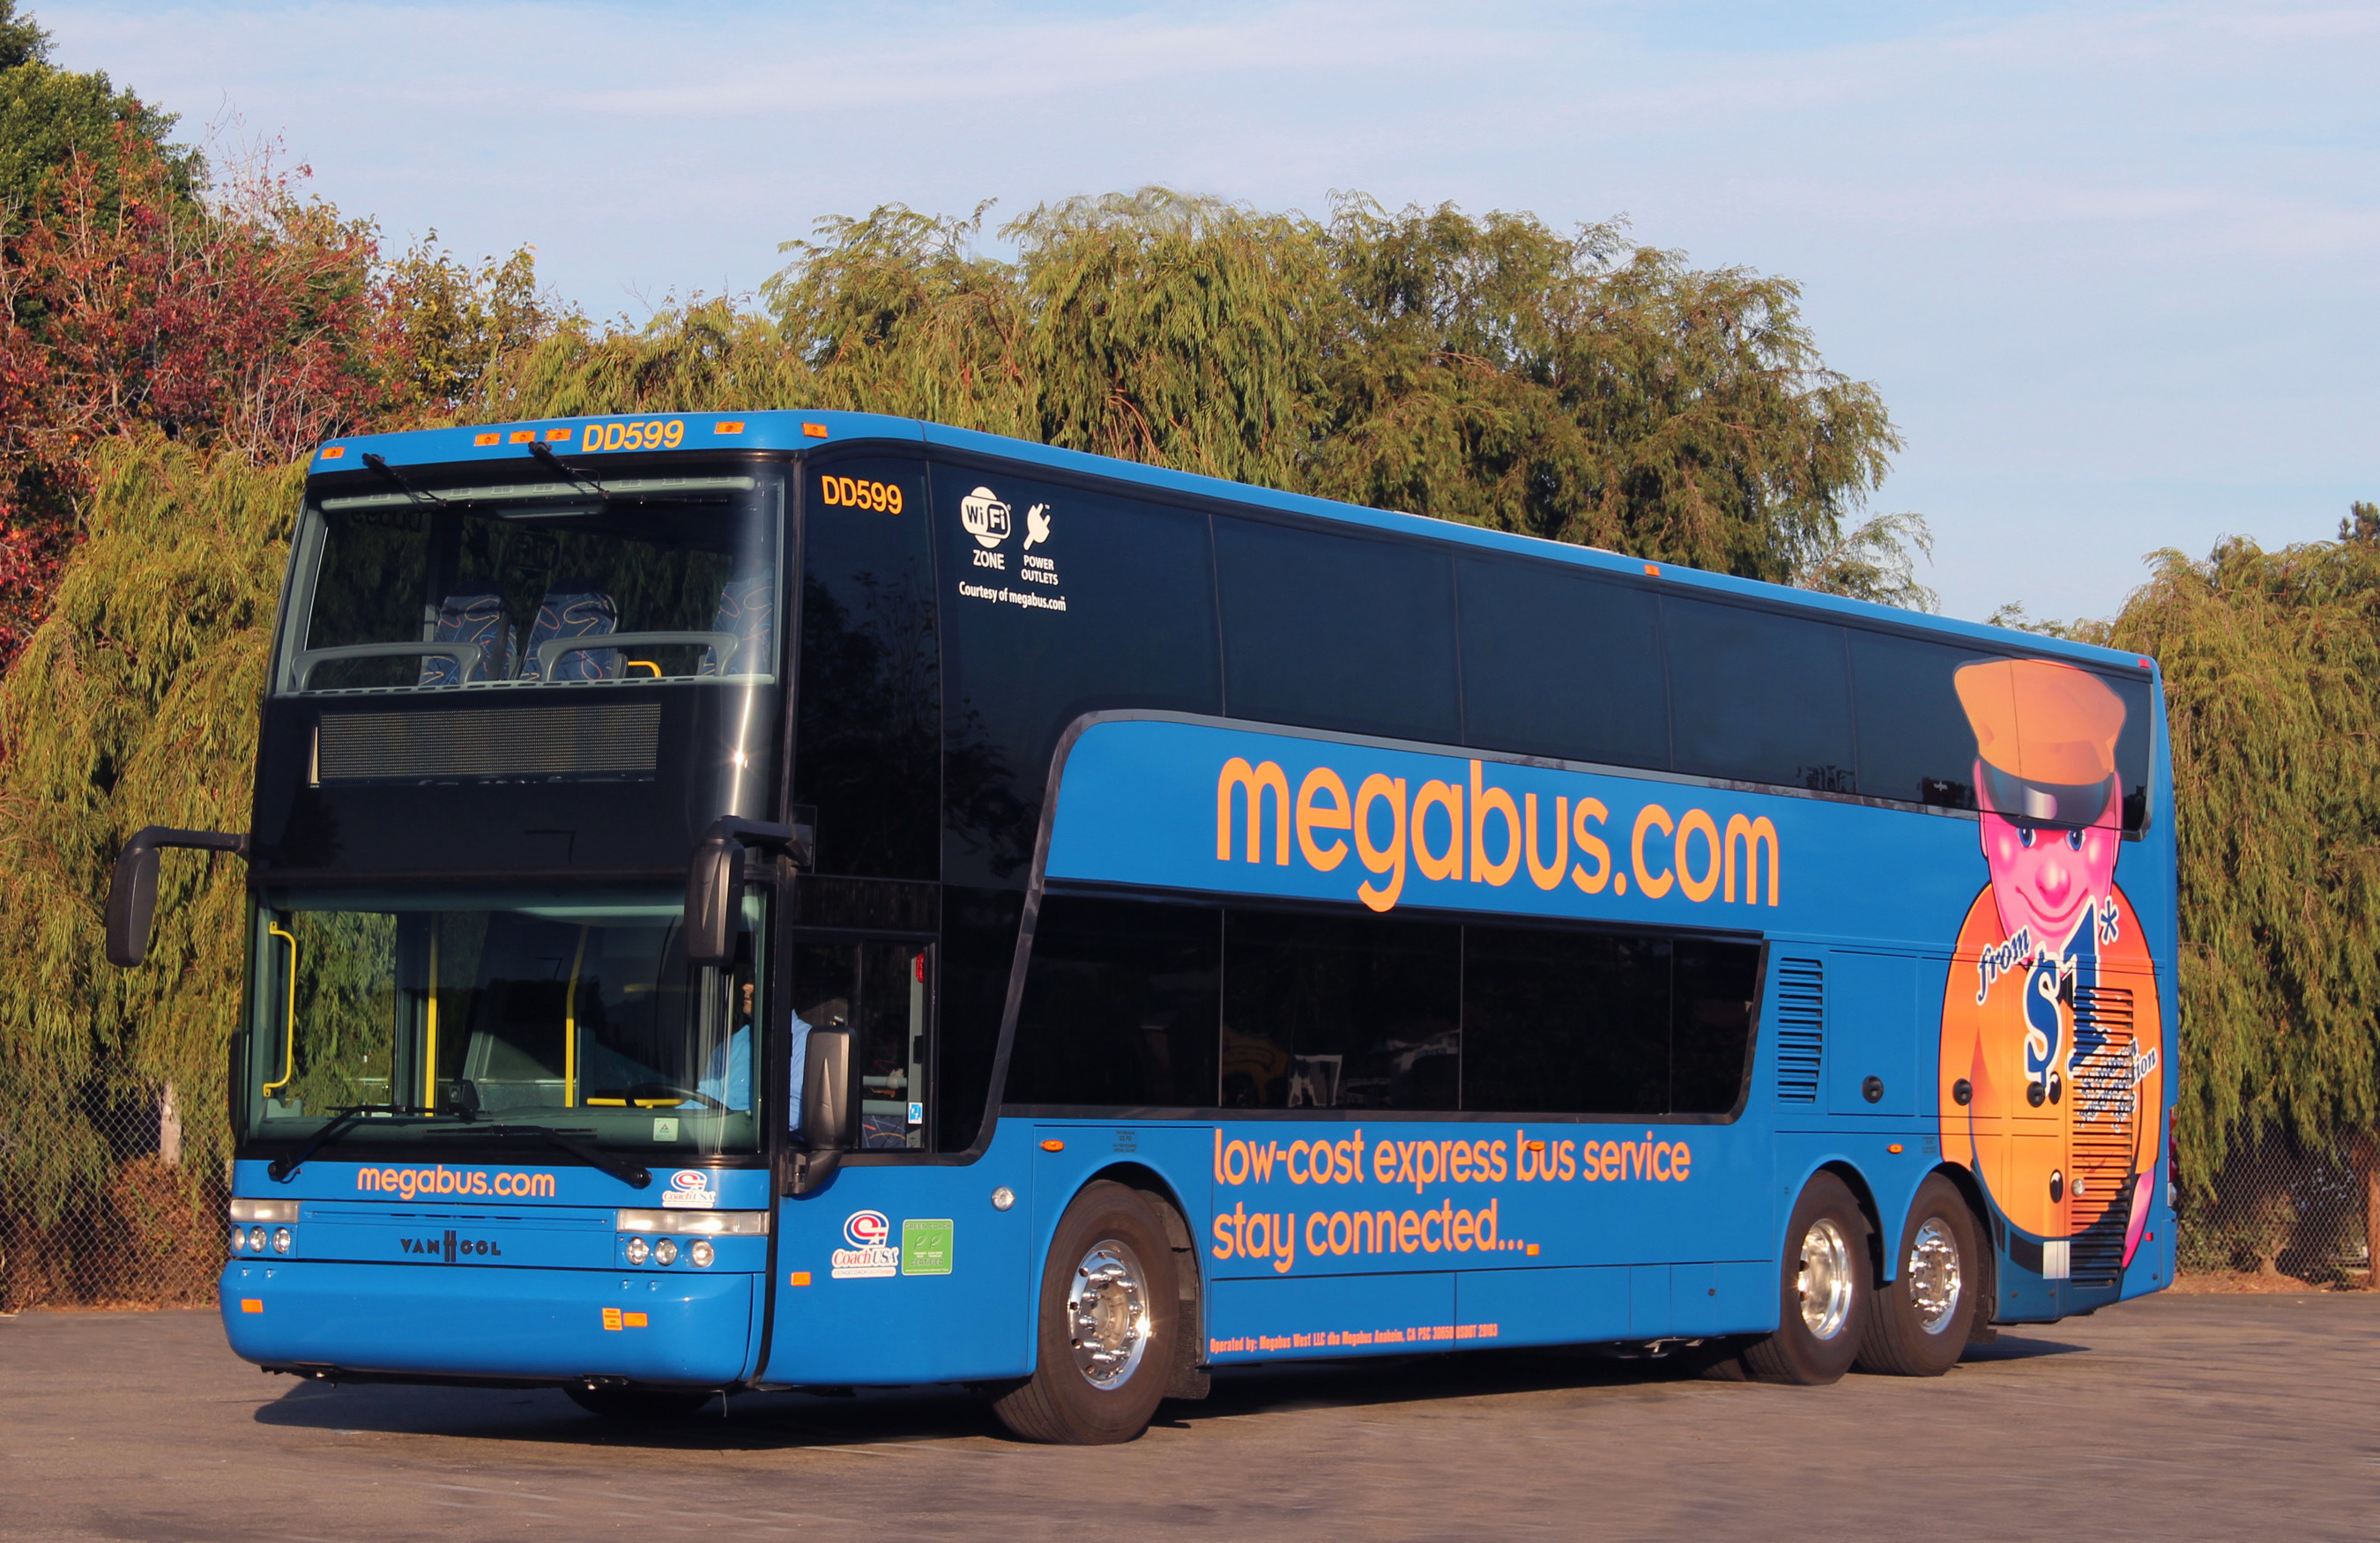 megabus and coach usa invest millions in greenroad eco-driving